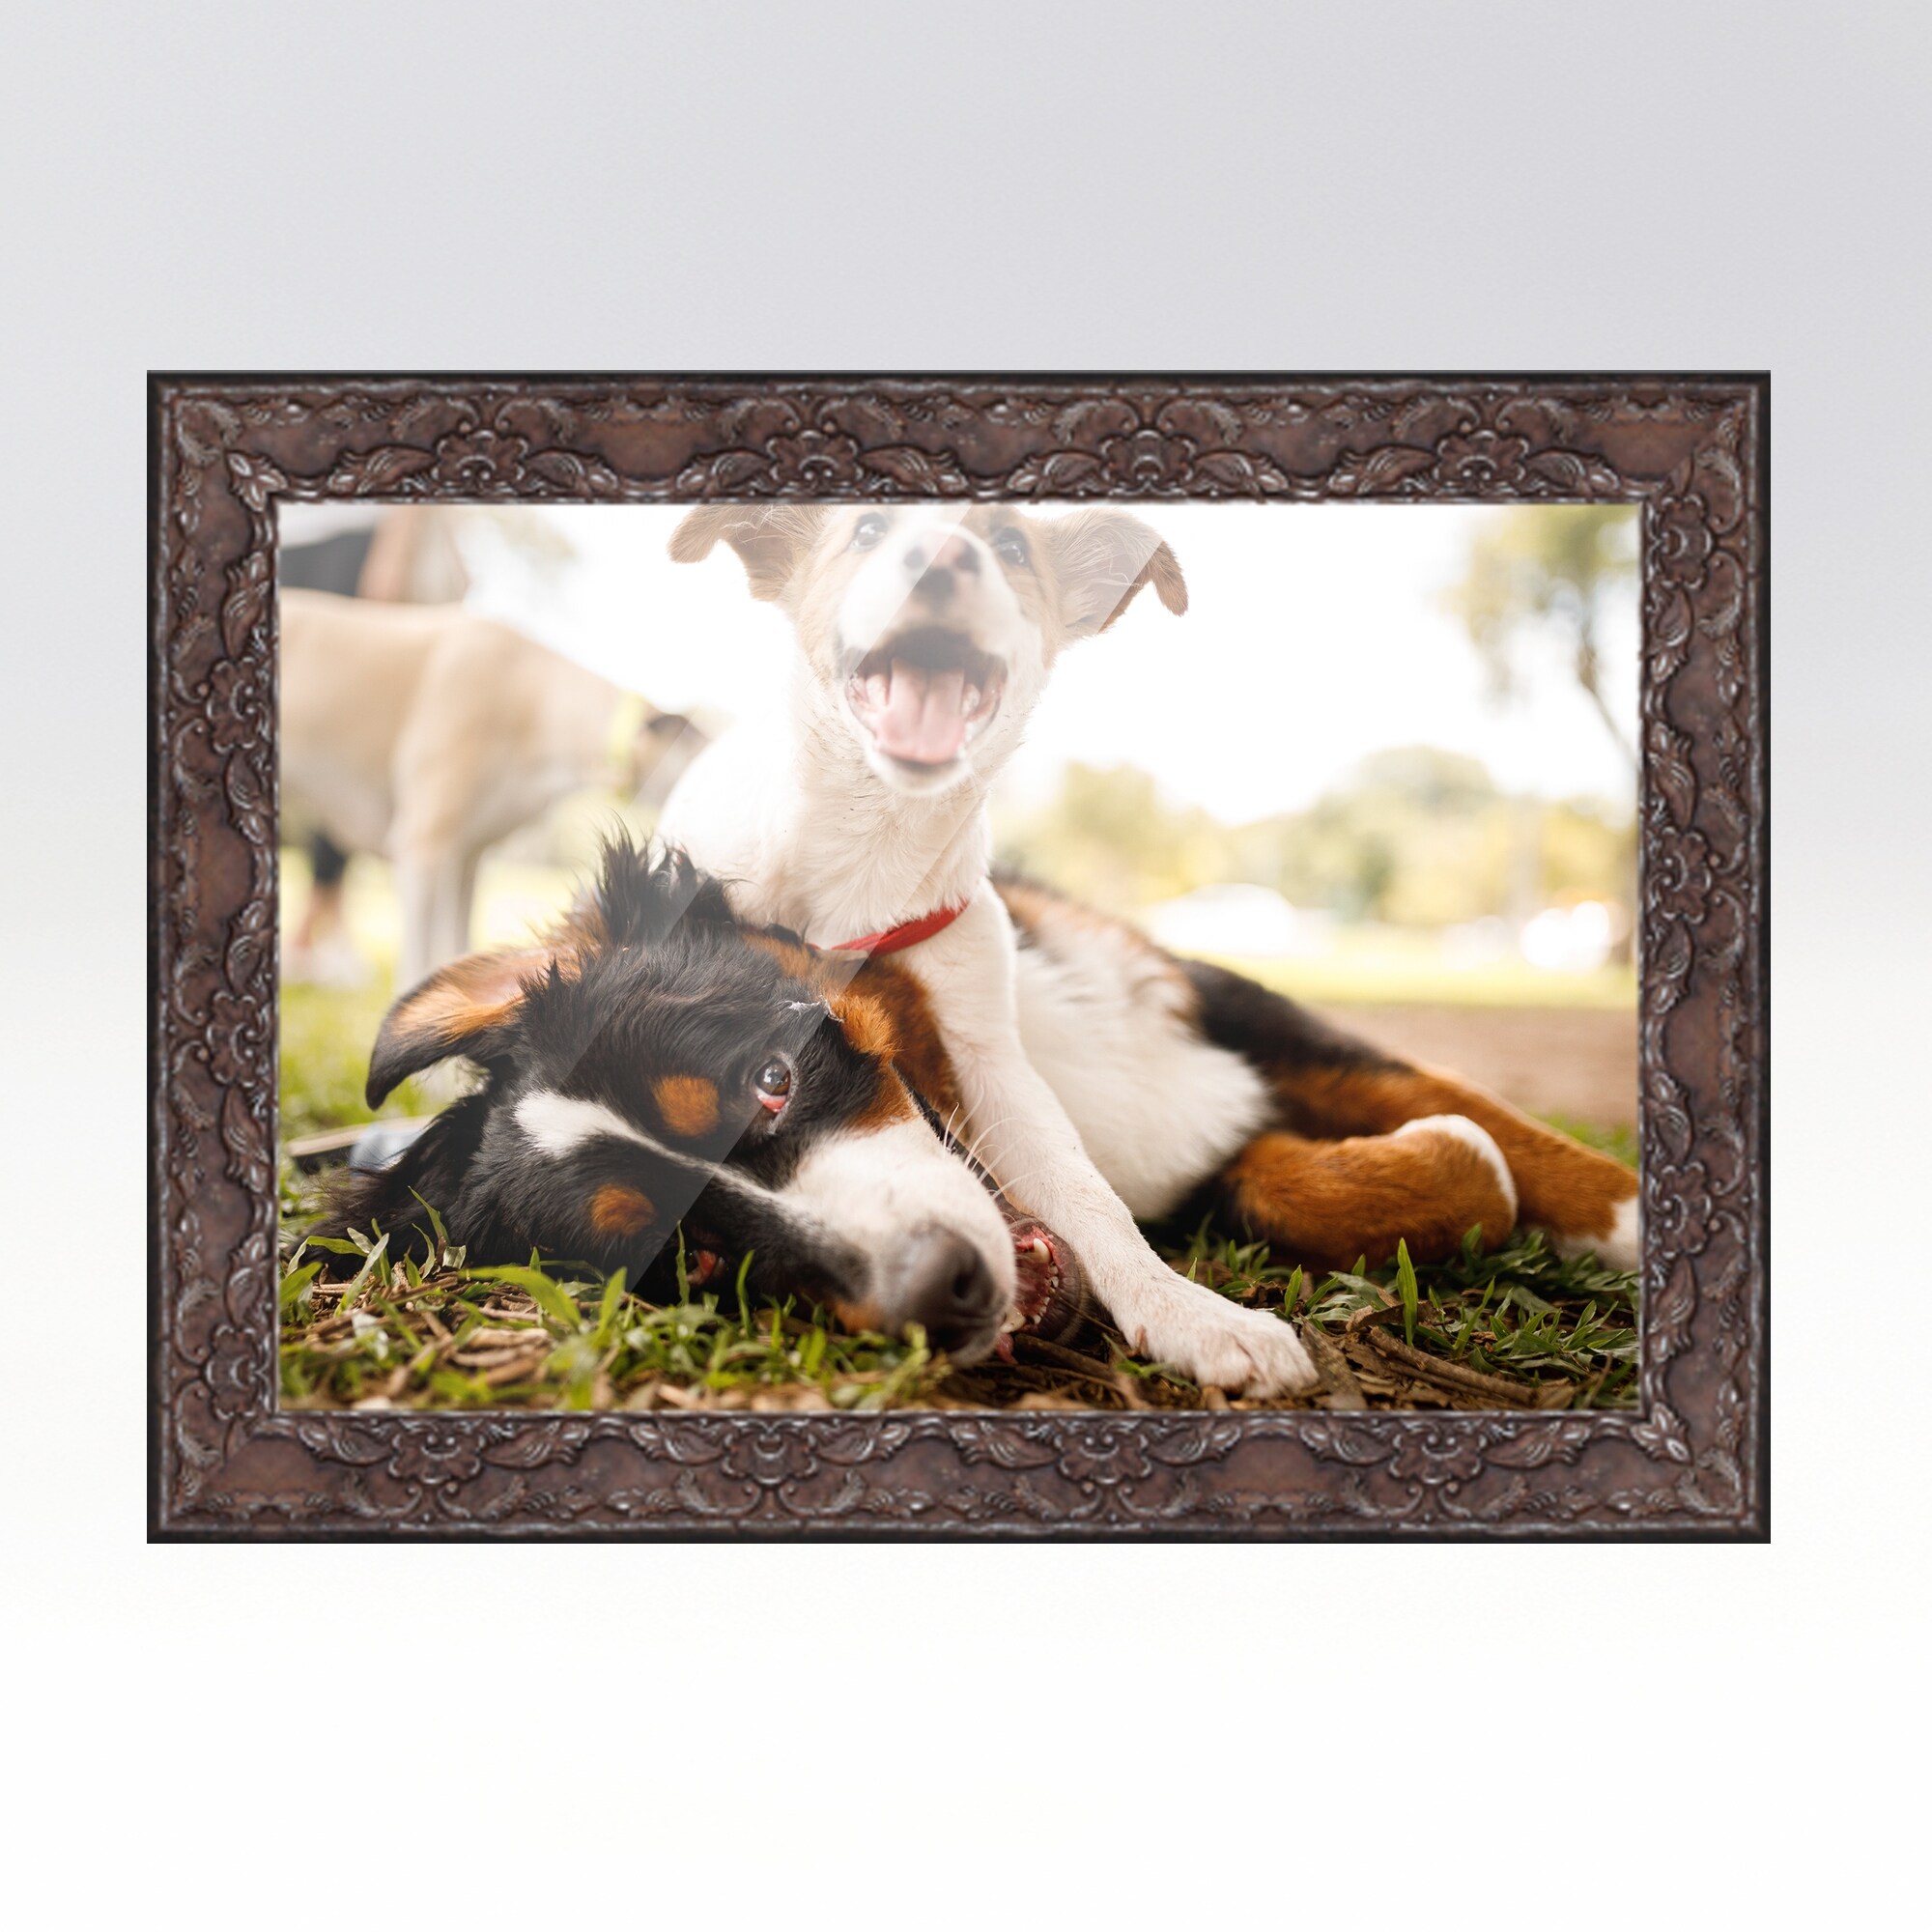 https://ak1.ostkcdn.com/images/products/is/images/direct/2f5177bab4d3503d19f2c8a492eb44b499624b53/16x23-Pewter-Picture-Frame---Wood-Picture-Frame-Complete-with-UV.jpg